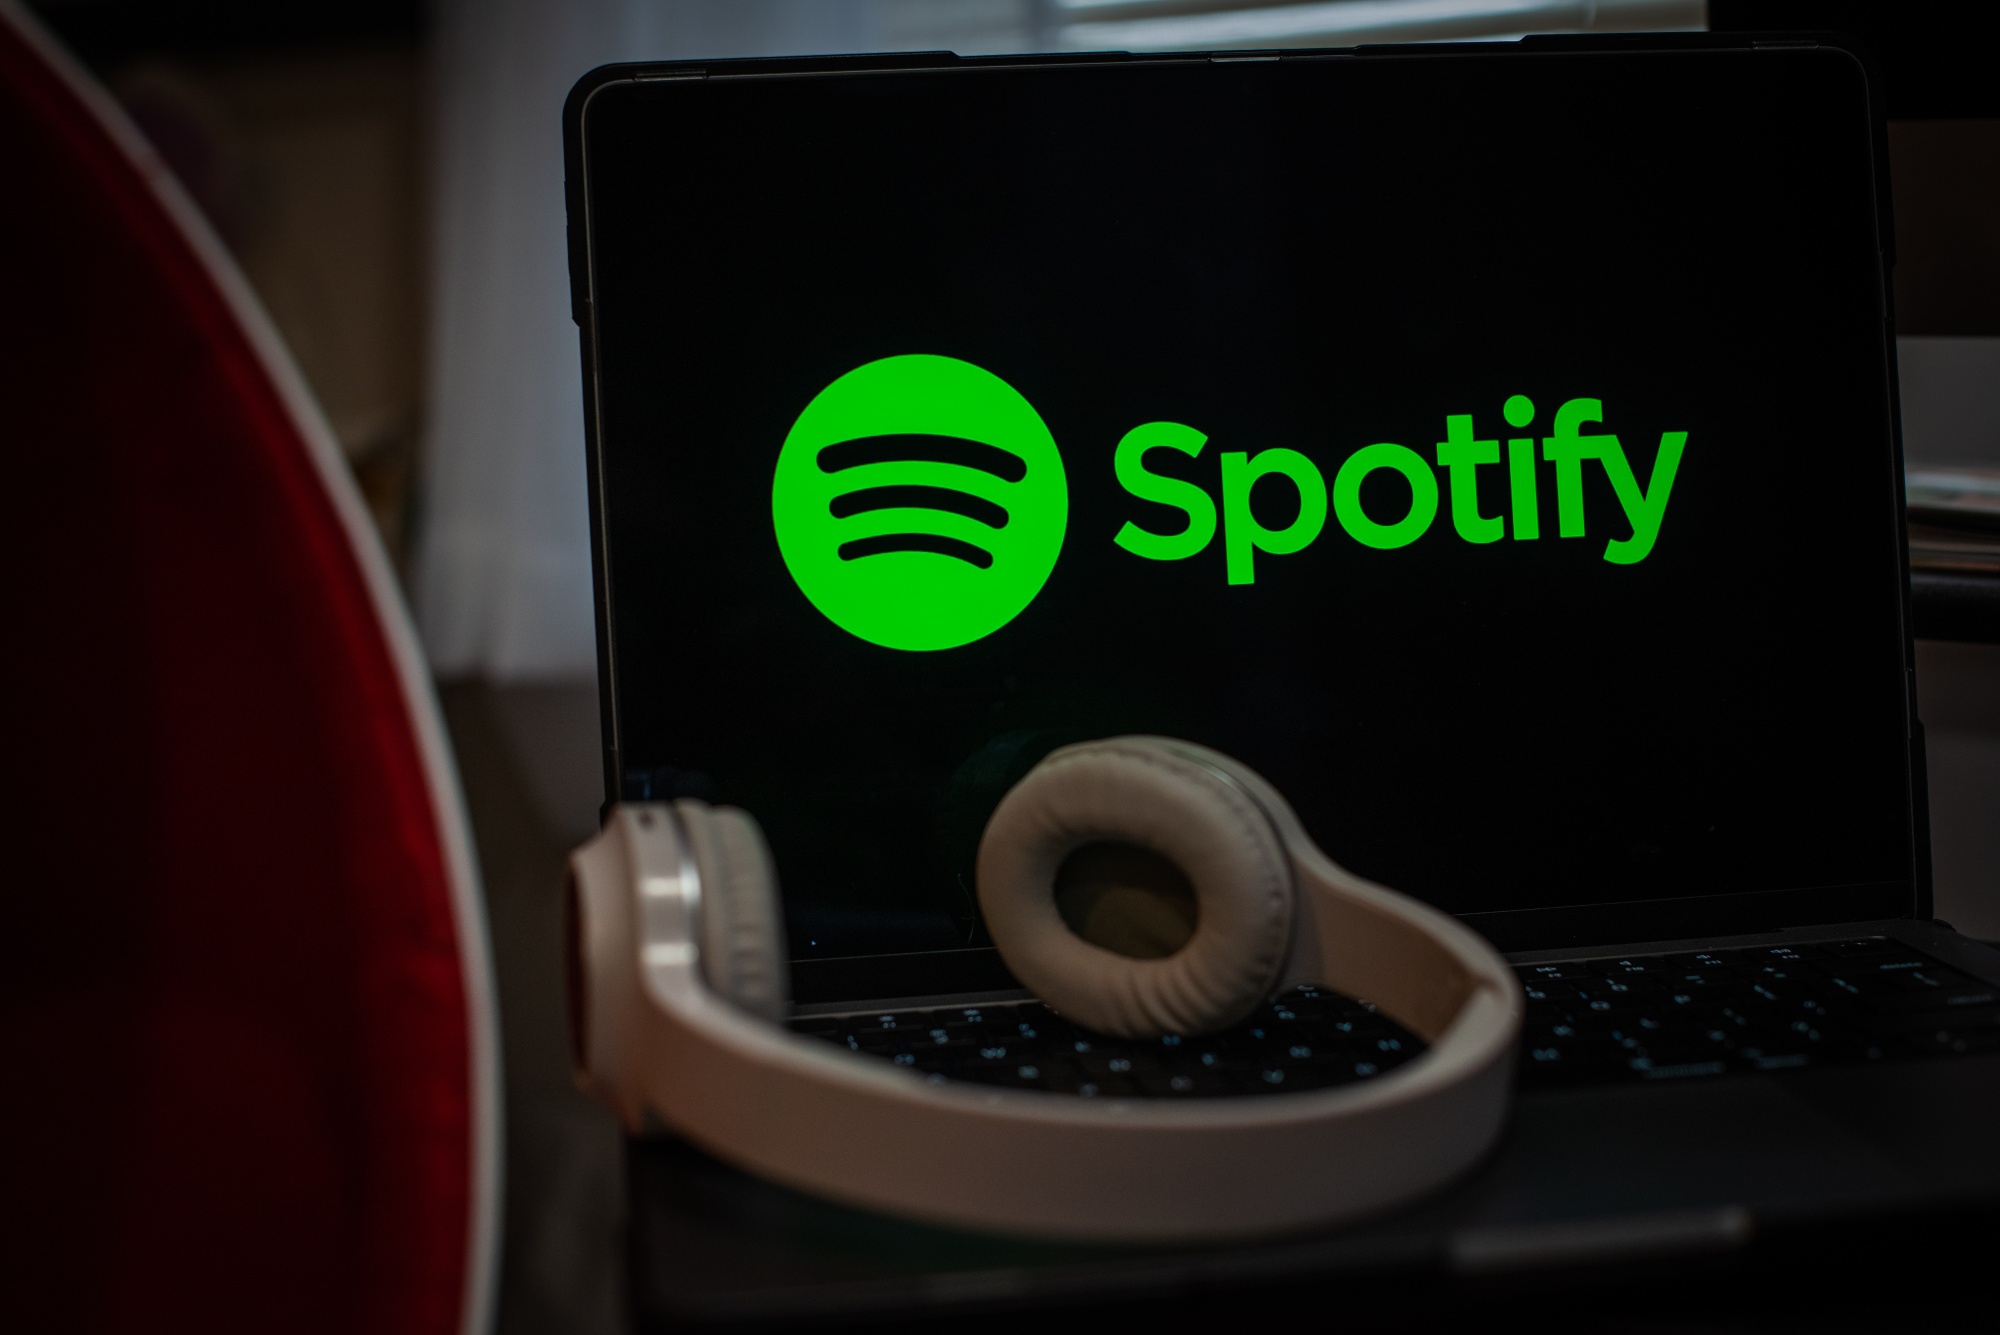 Spotify Podcast Strategy Shifts, Making Exclusives Available on Other  Platforms - Bloomberg